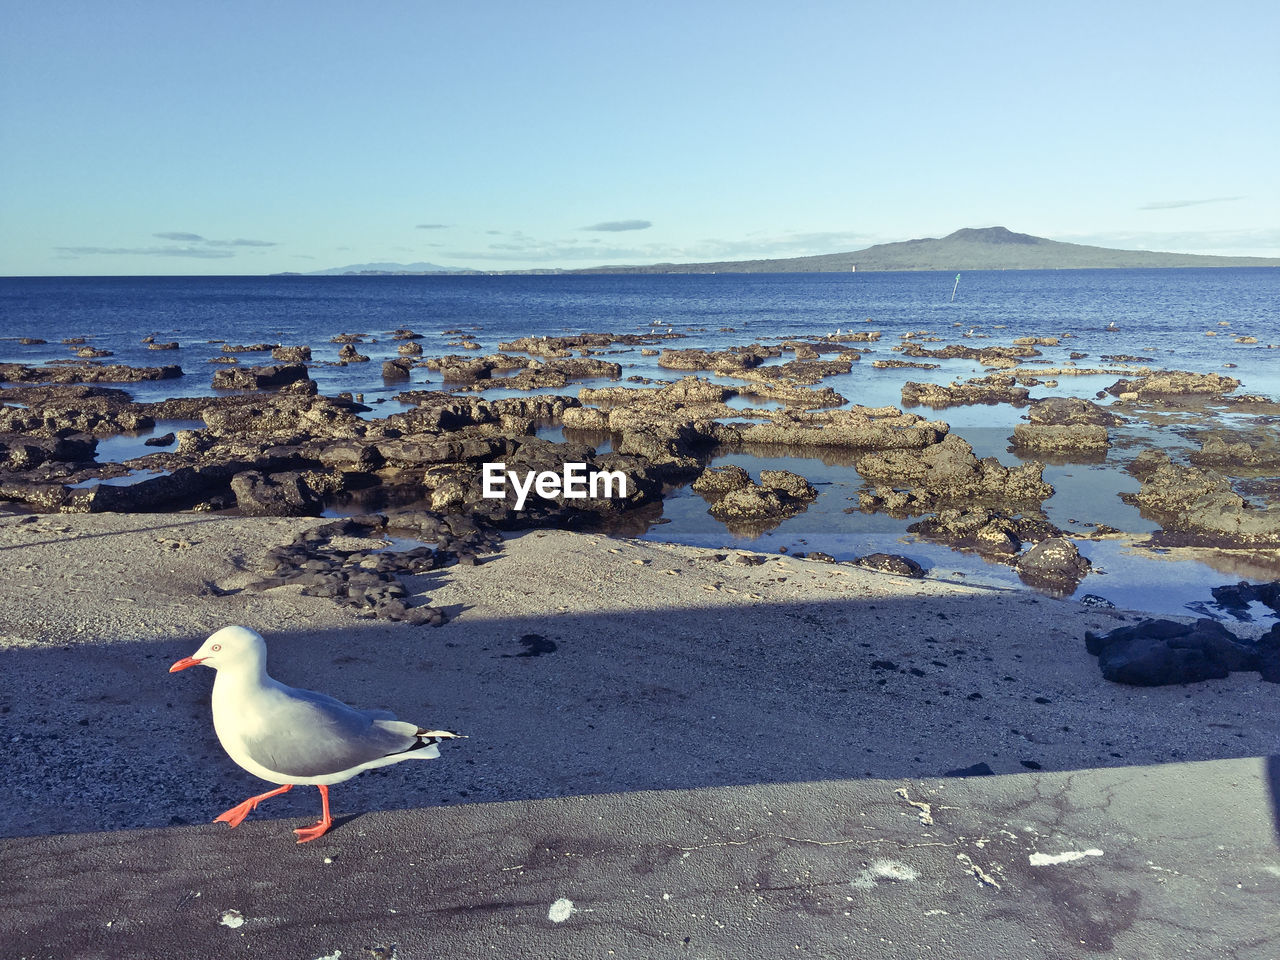 Seagulls perching on shore against clear sky